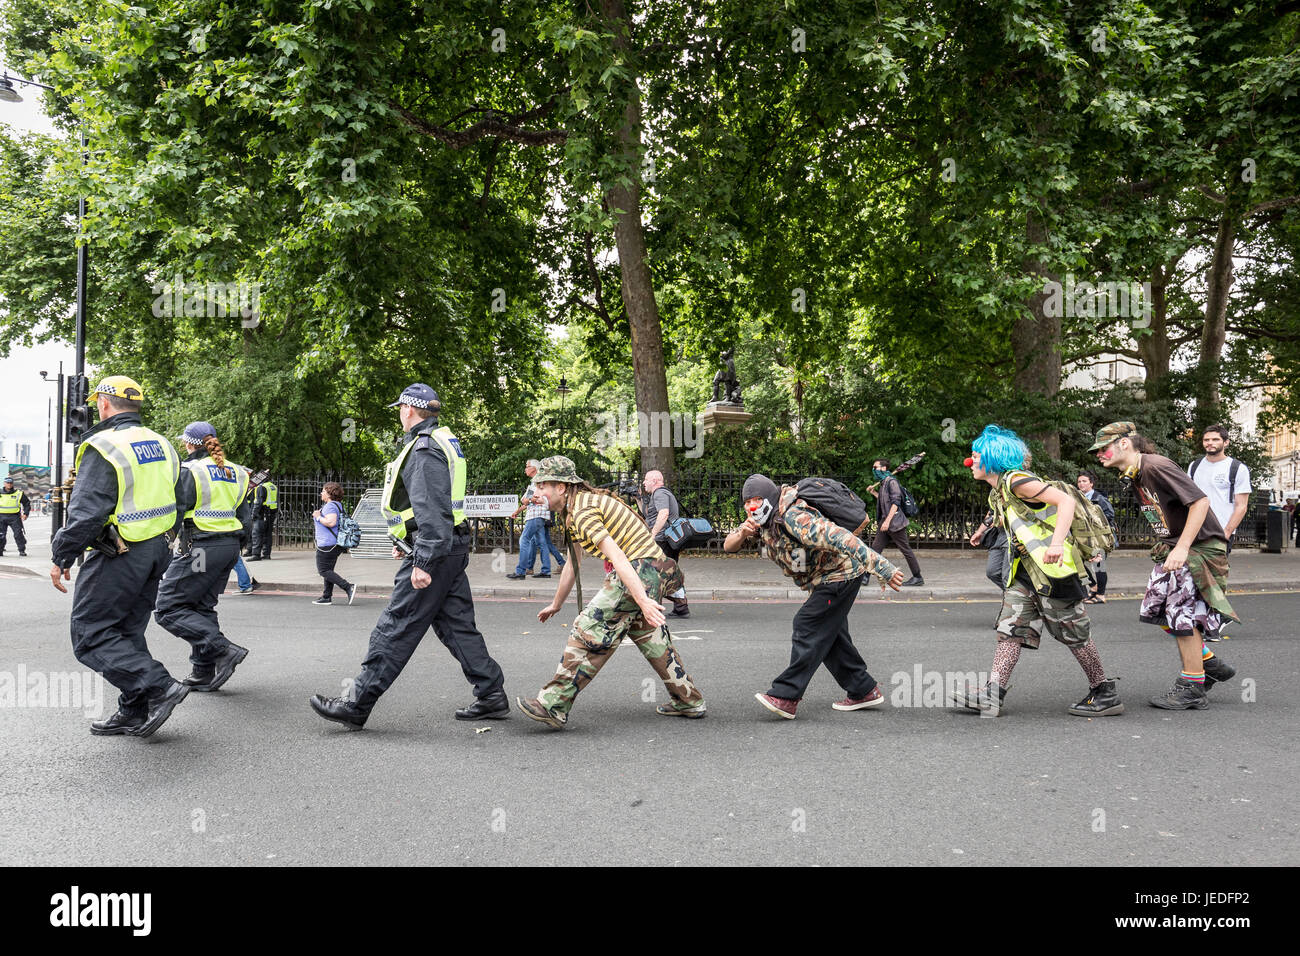 London, UK. 24th June, 2017. Anti-fascist activists dressed as clowns humorously follow and taunt the police prior to the EDL rally. Anti-Fascist groups including Unite Against Fascism (UAF) clash with police with some arrests being made whilst counter-protesting the far-right British nationalist group English Defence League (EDL) during their “march against terrorism” in light of the recent city terror attacks. Credit: Guy Corbishley/Alamy Live News Stock Photo